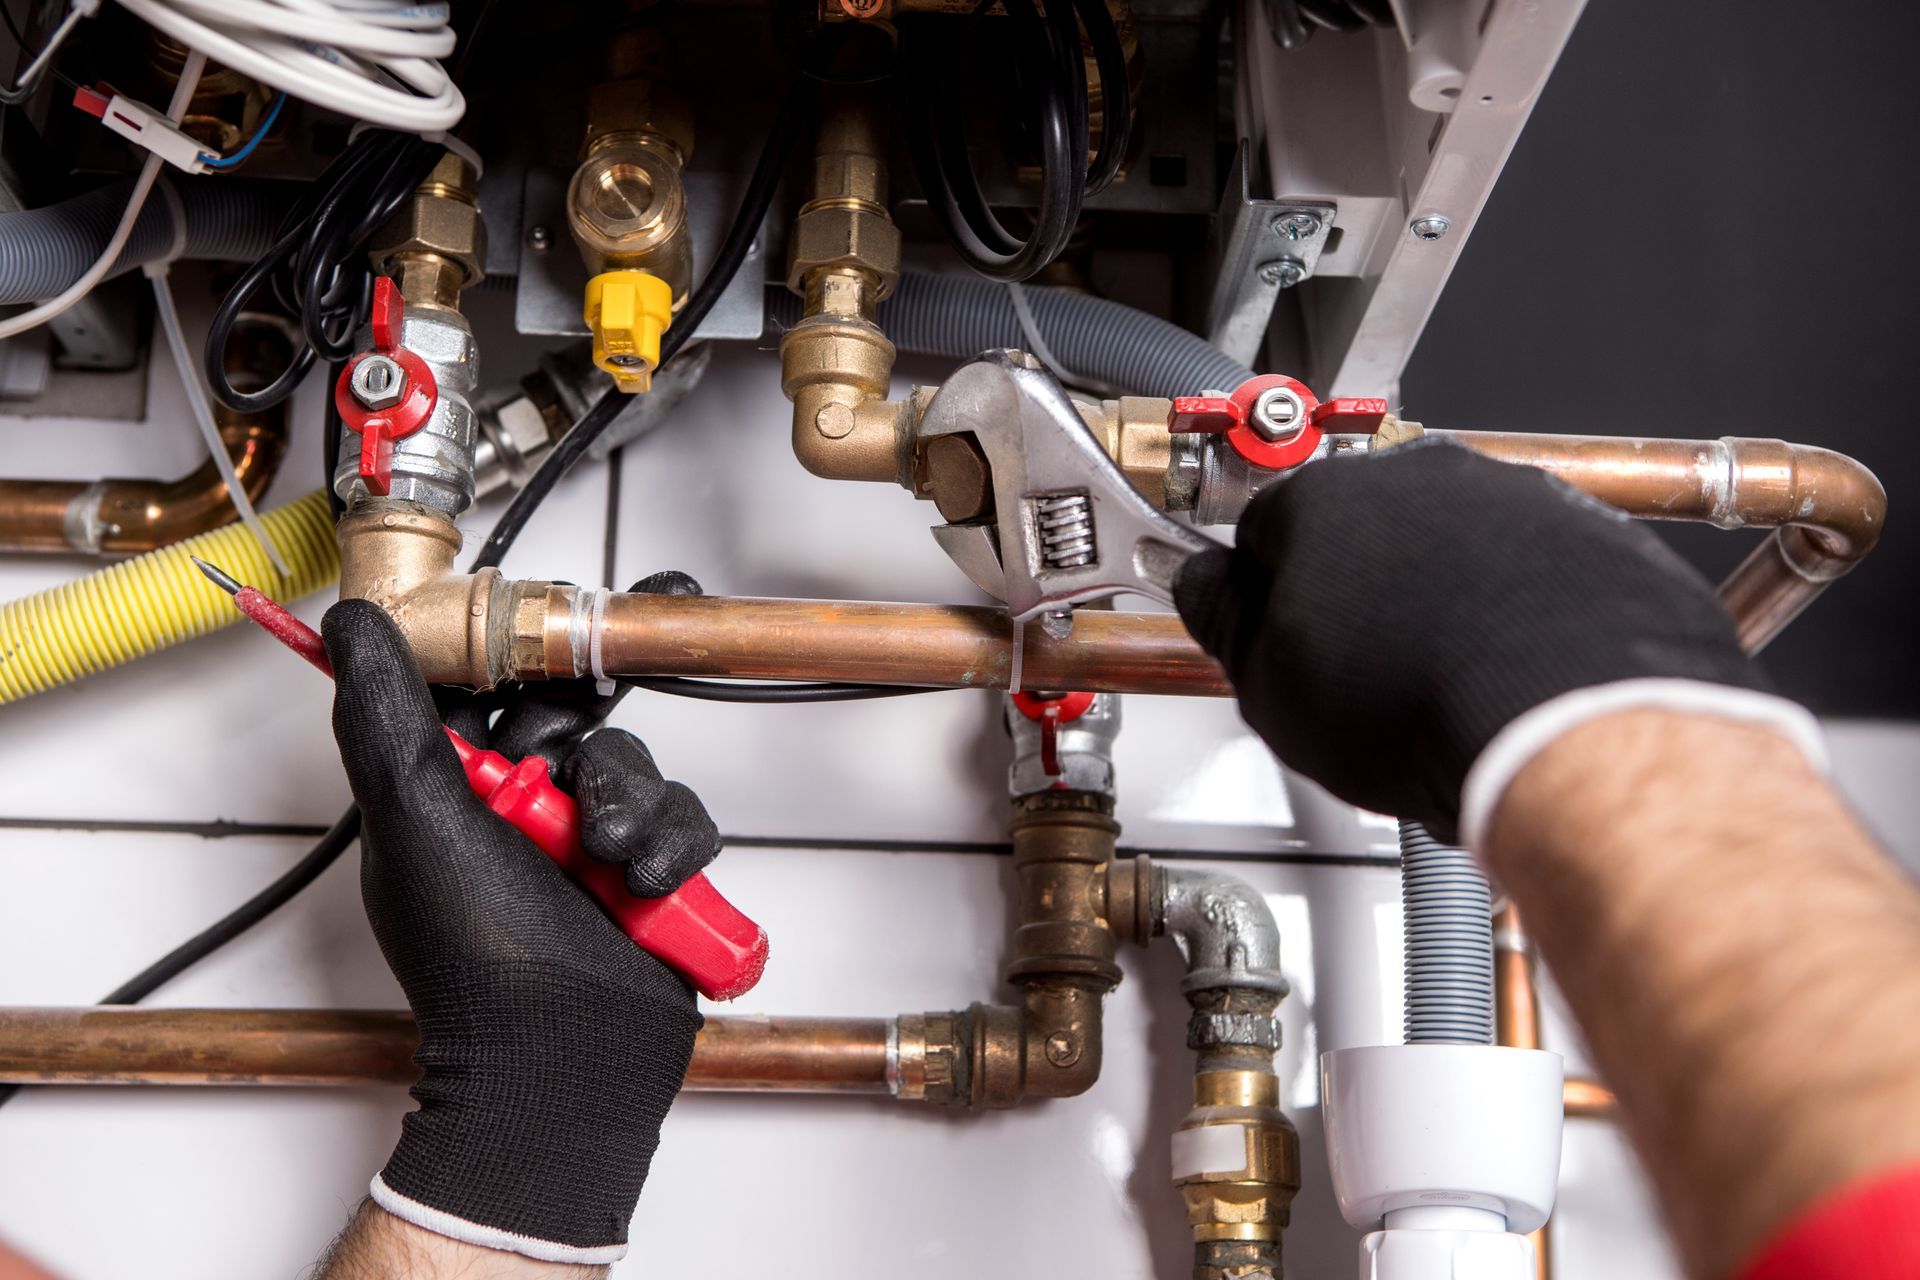 An image showing a professional technician performing maintenance on a residential boiler.